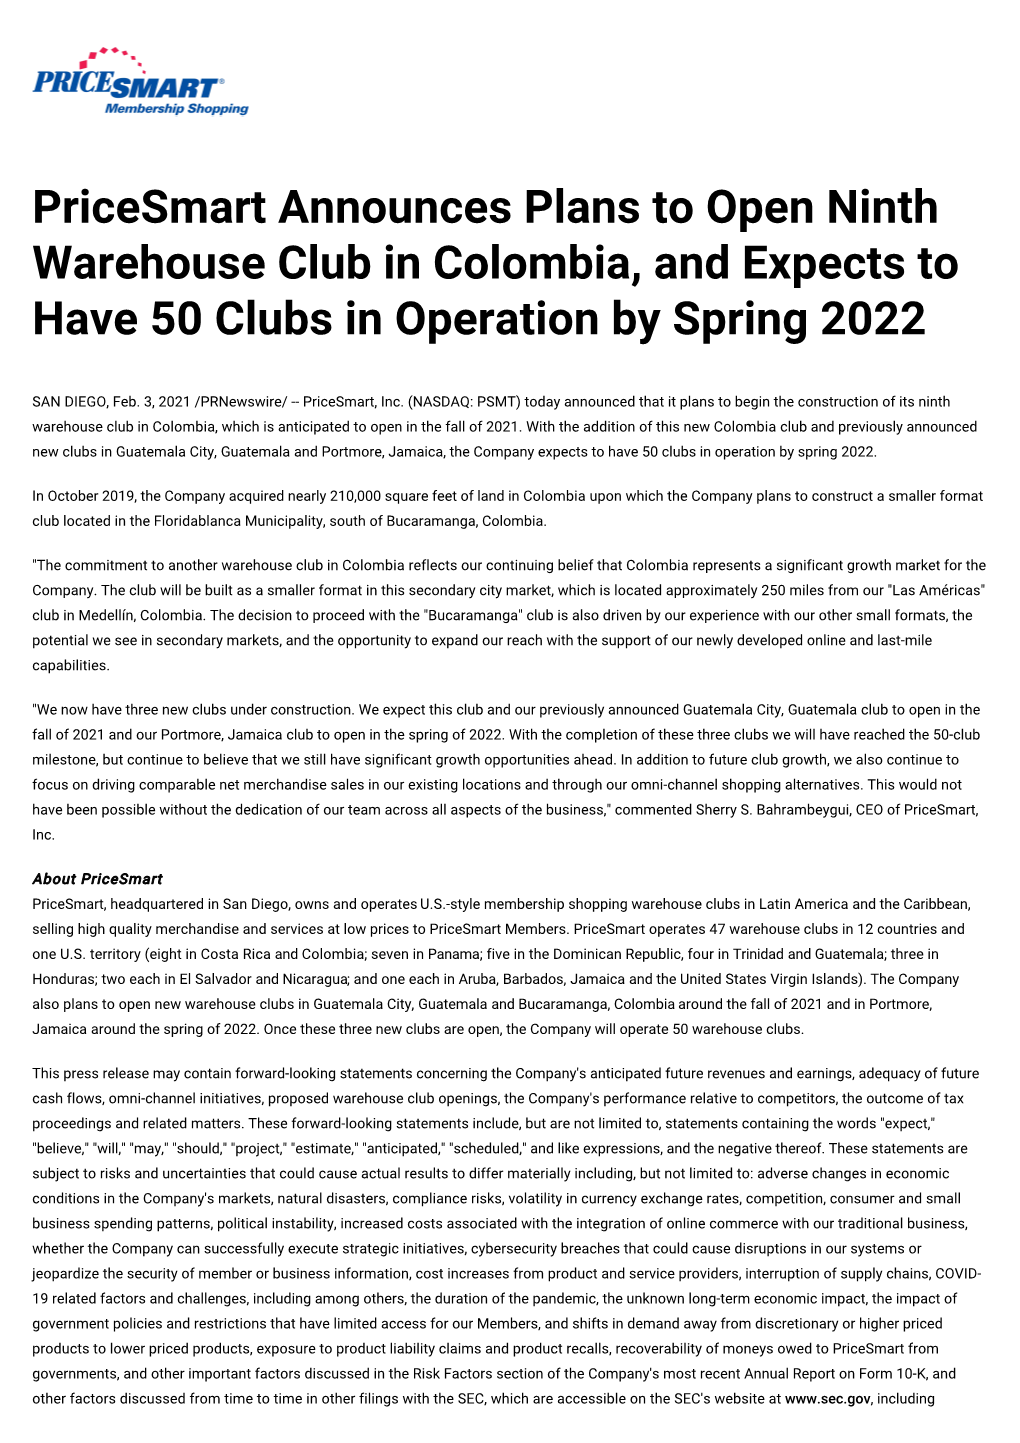 Pricesmart Announces Plans to Open Ninth Warehouse Club in Colombia, and Expects to Have 50 Clubs in Operation by Spring 2022